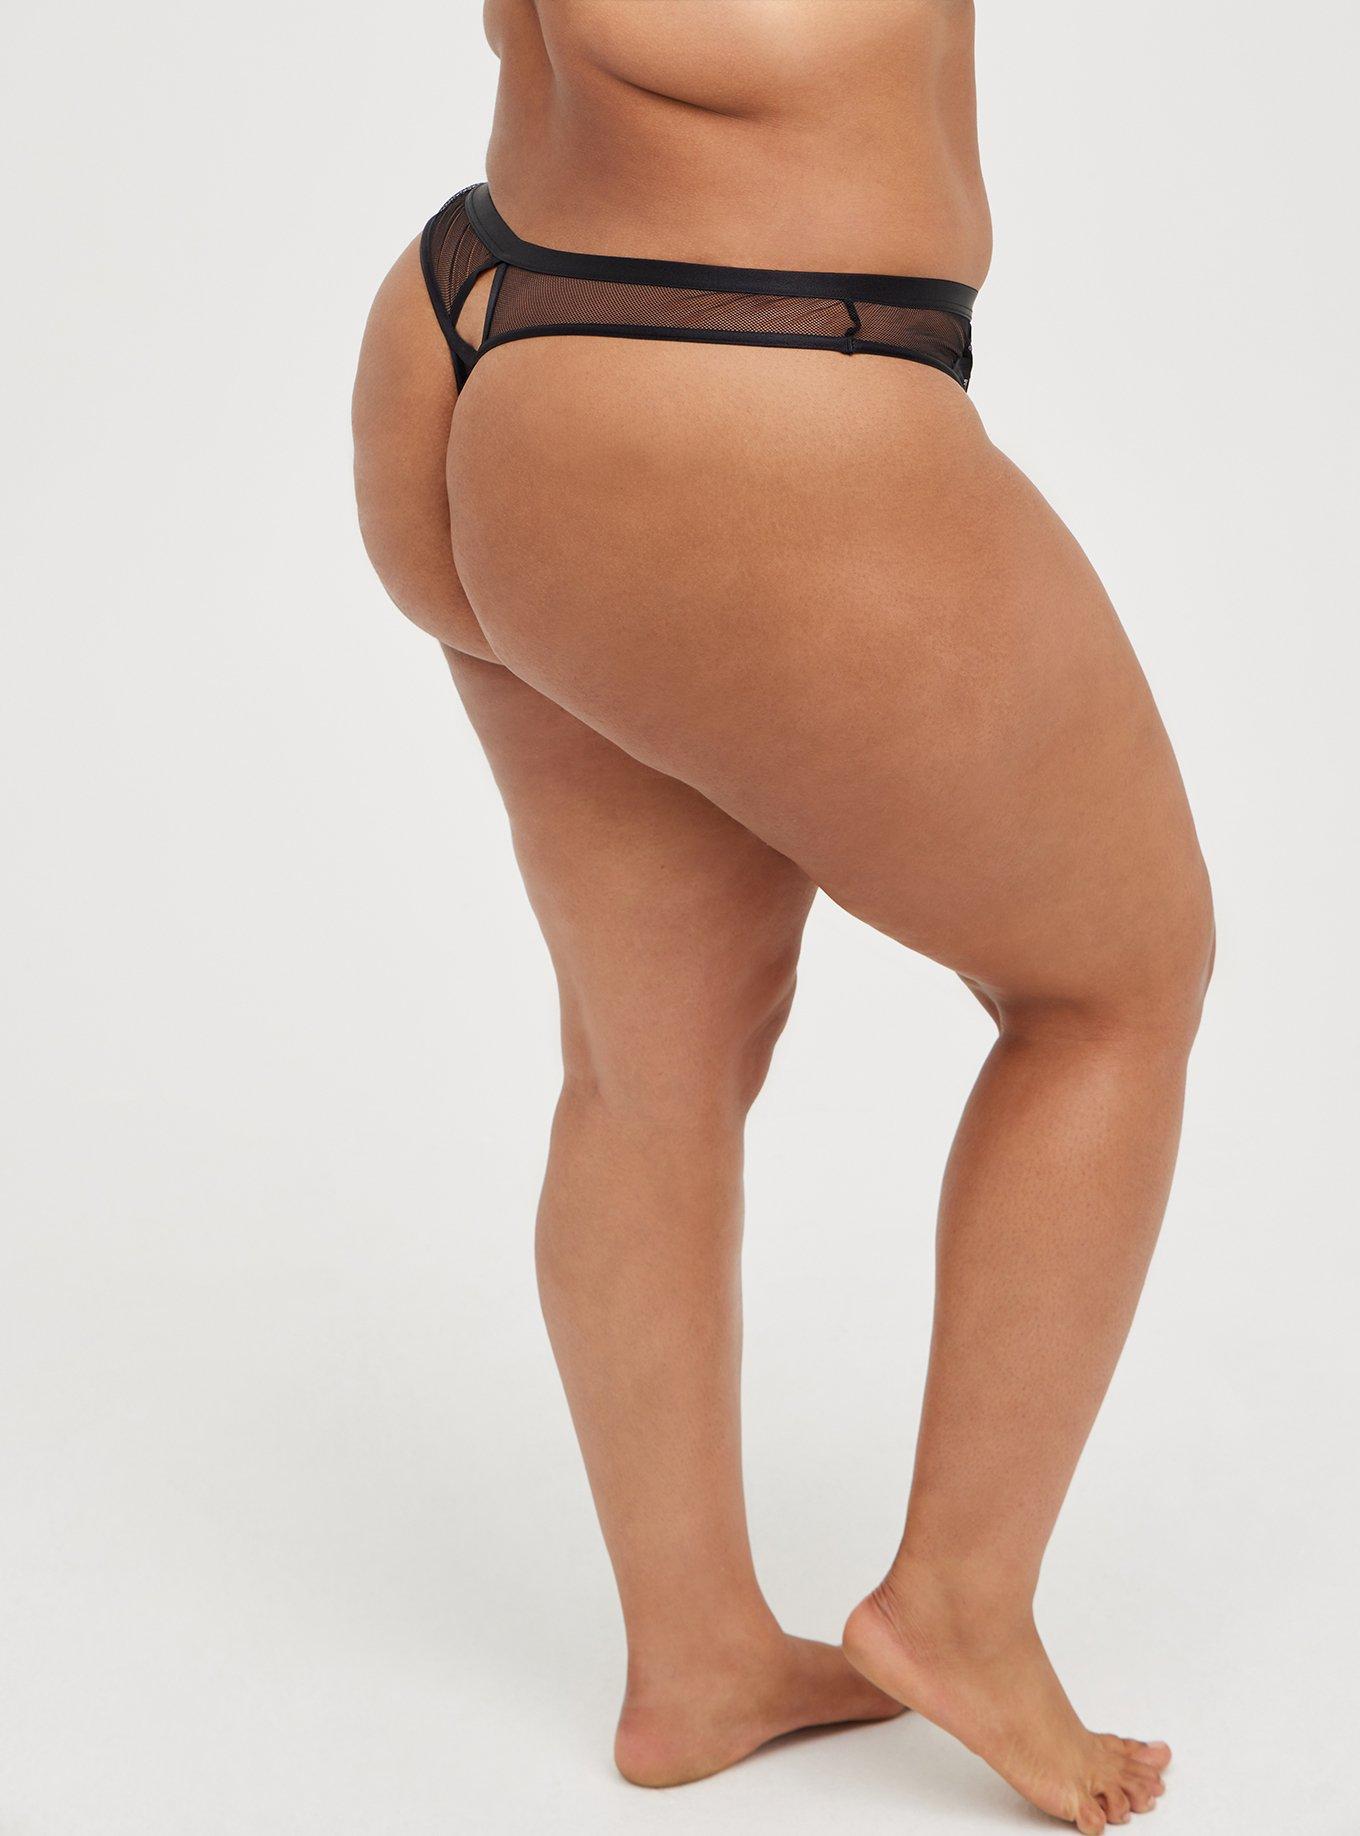 Women's Faux Leather Thong Panties